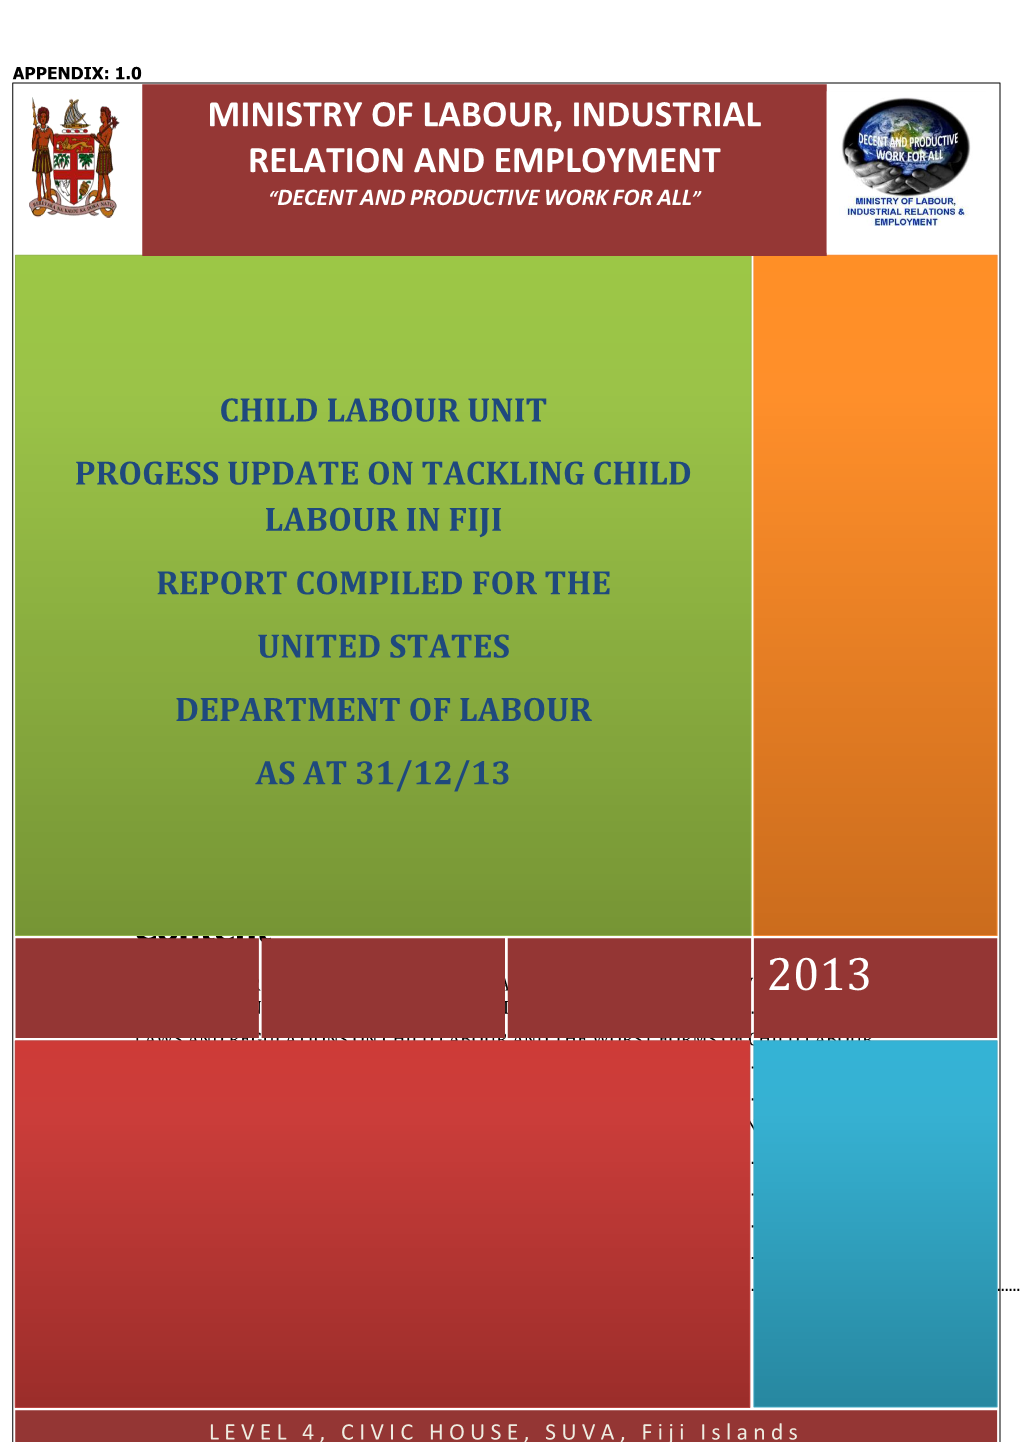 Child Labour Unit Progess Update on Tackling Child Labour in Fiji Report Compiled for the United States Department of Labour As at 31/12/13